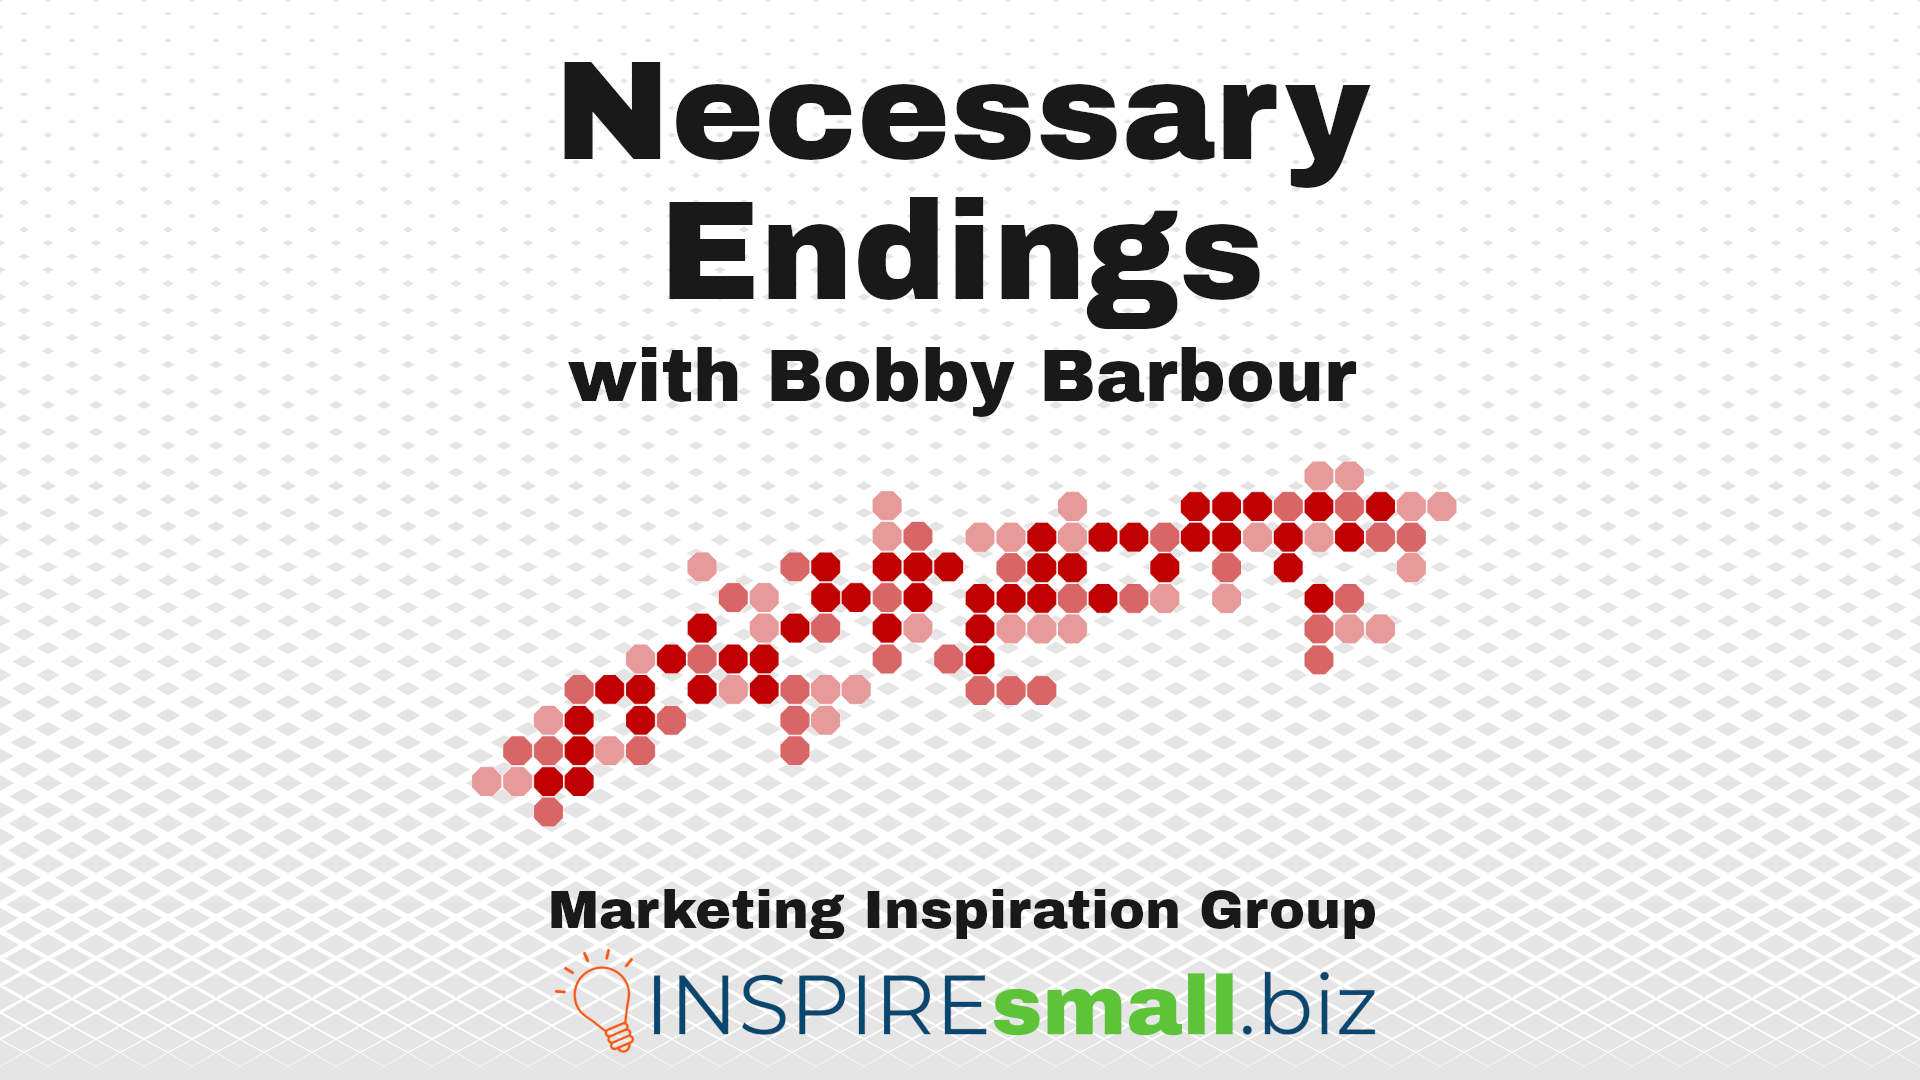 Necessary Endings with Bobby Barbour at Marketing Inspiration Group with INSPIREsmall.biz